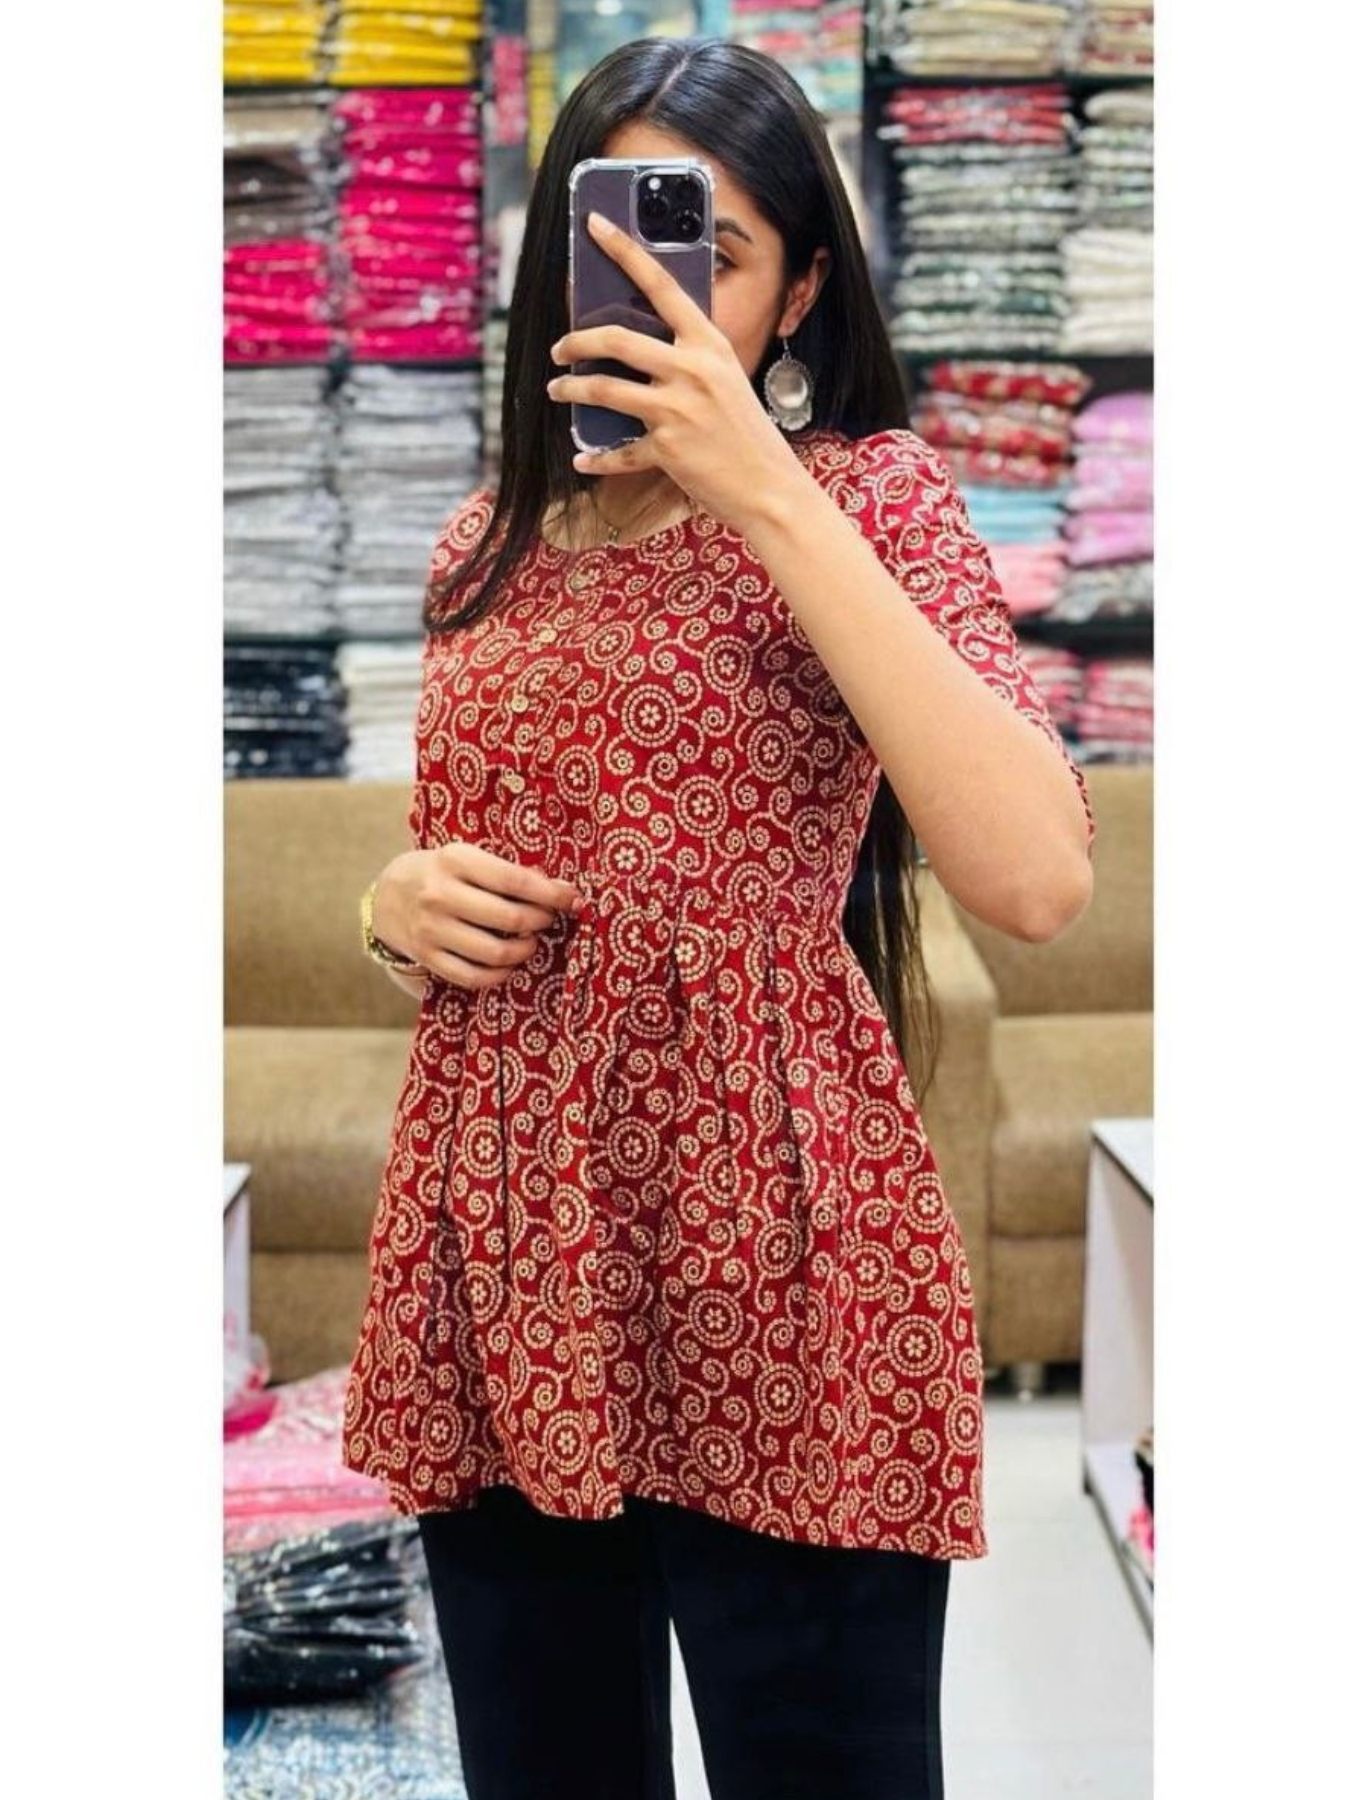 $36 - $48 - Casual Printed Kurti and Casual Printed Tunic online shopping